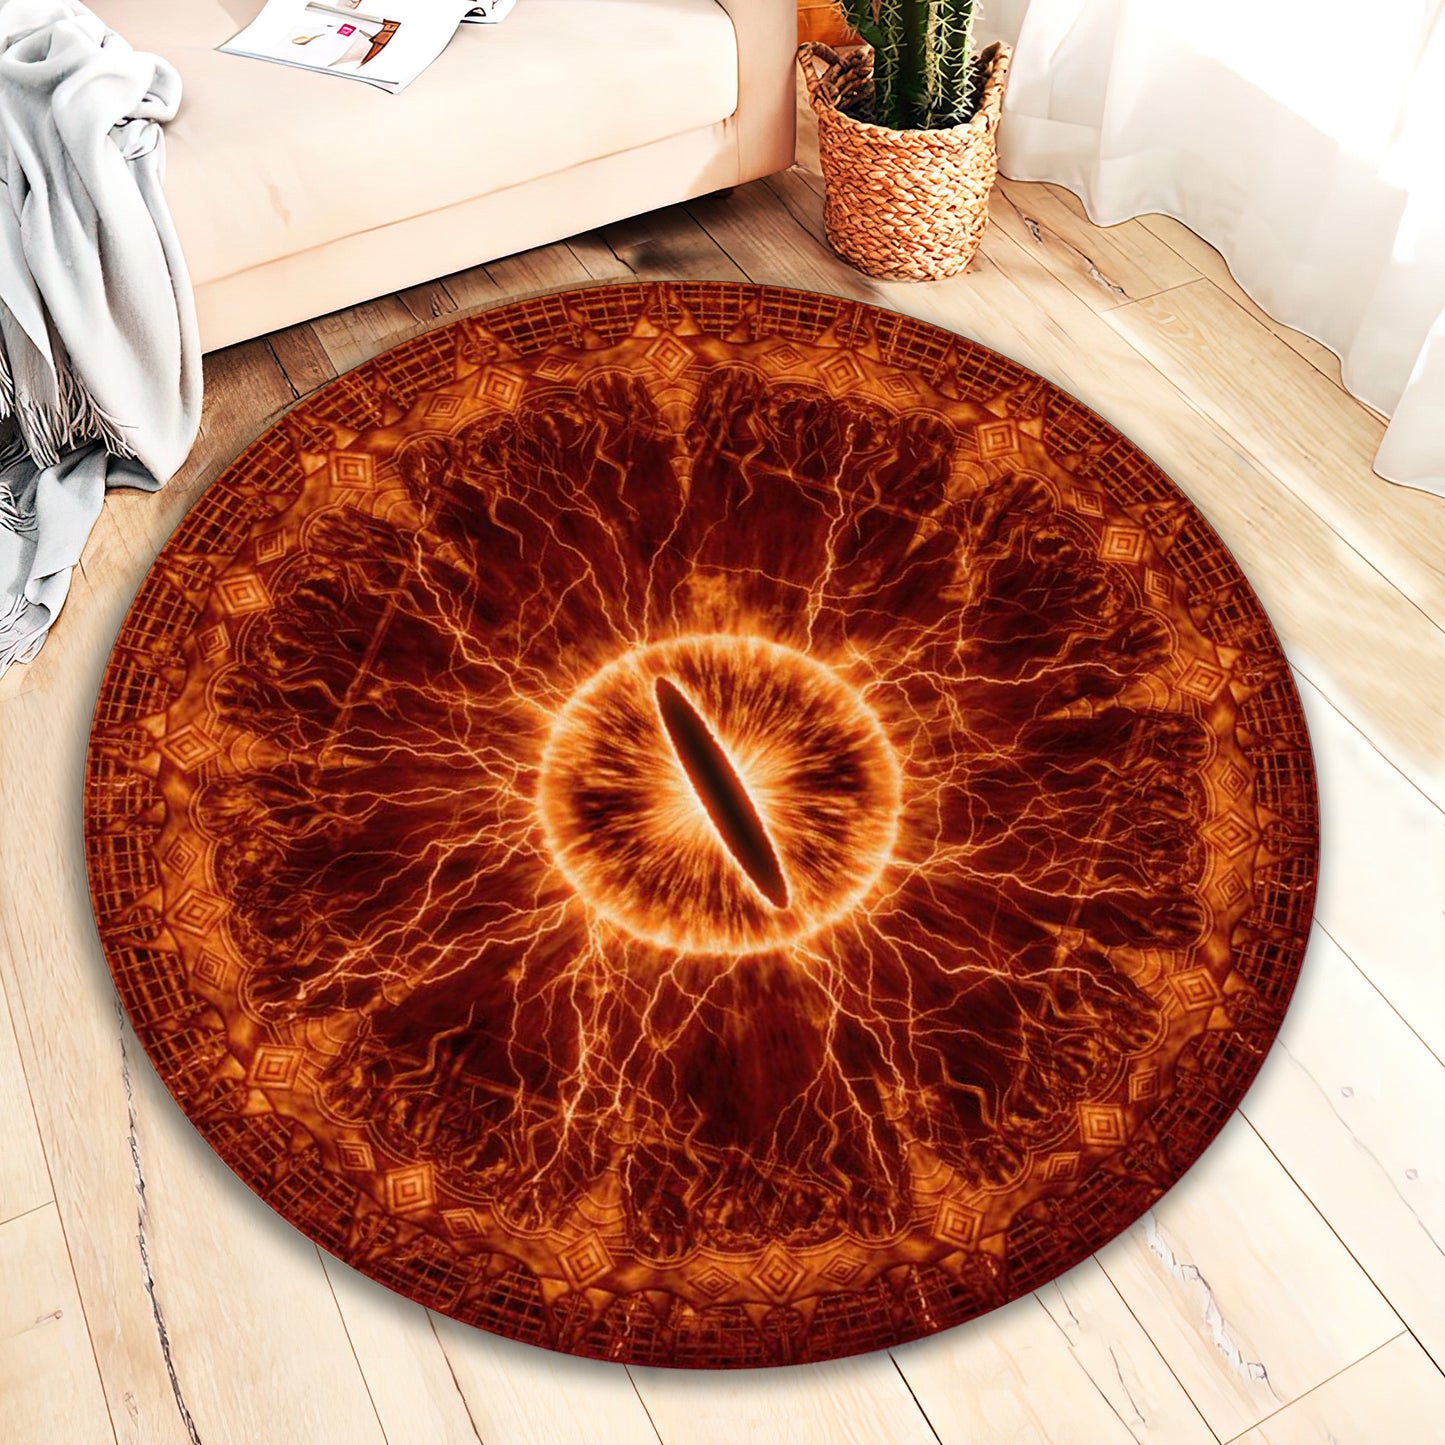 Eye Of Sauron Rug, Horror Decor, Lord Of The Rings Sauron Carpet, Fantastic Movie Round Mat, Scary Rug